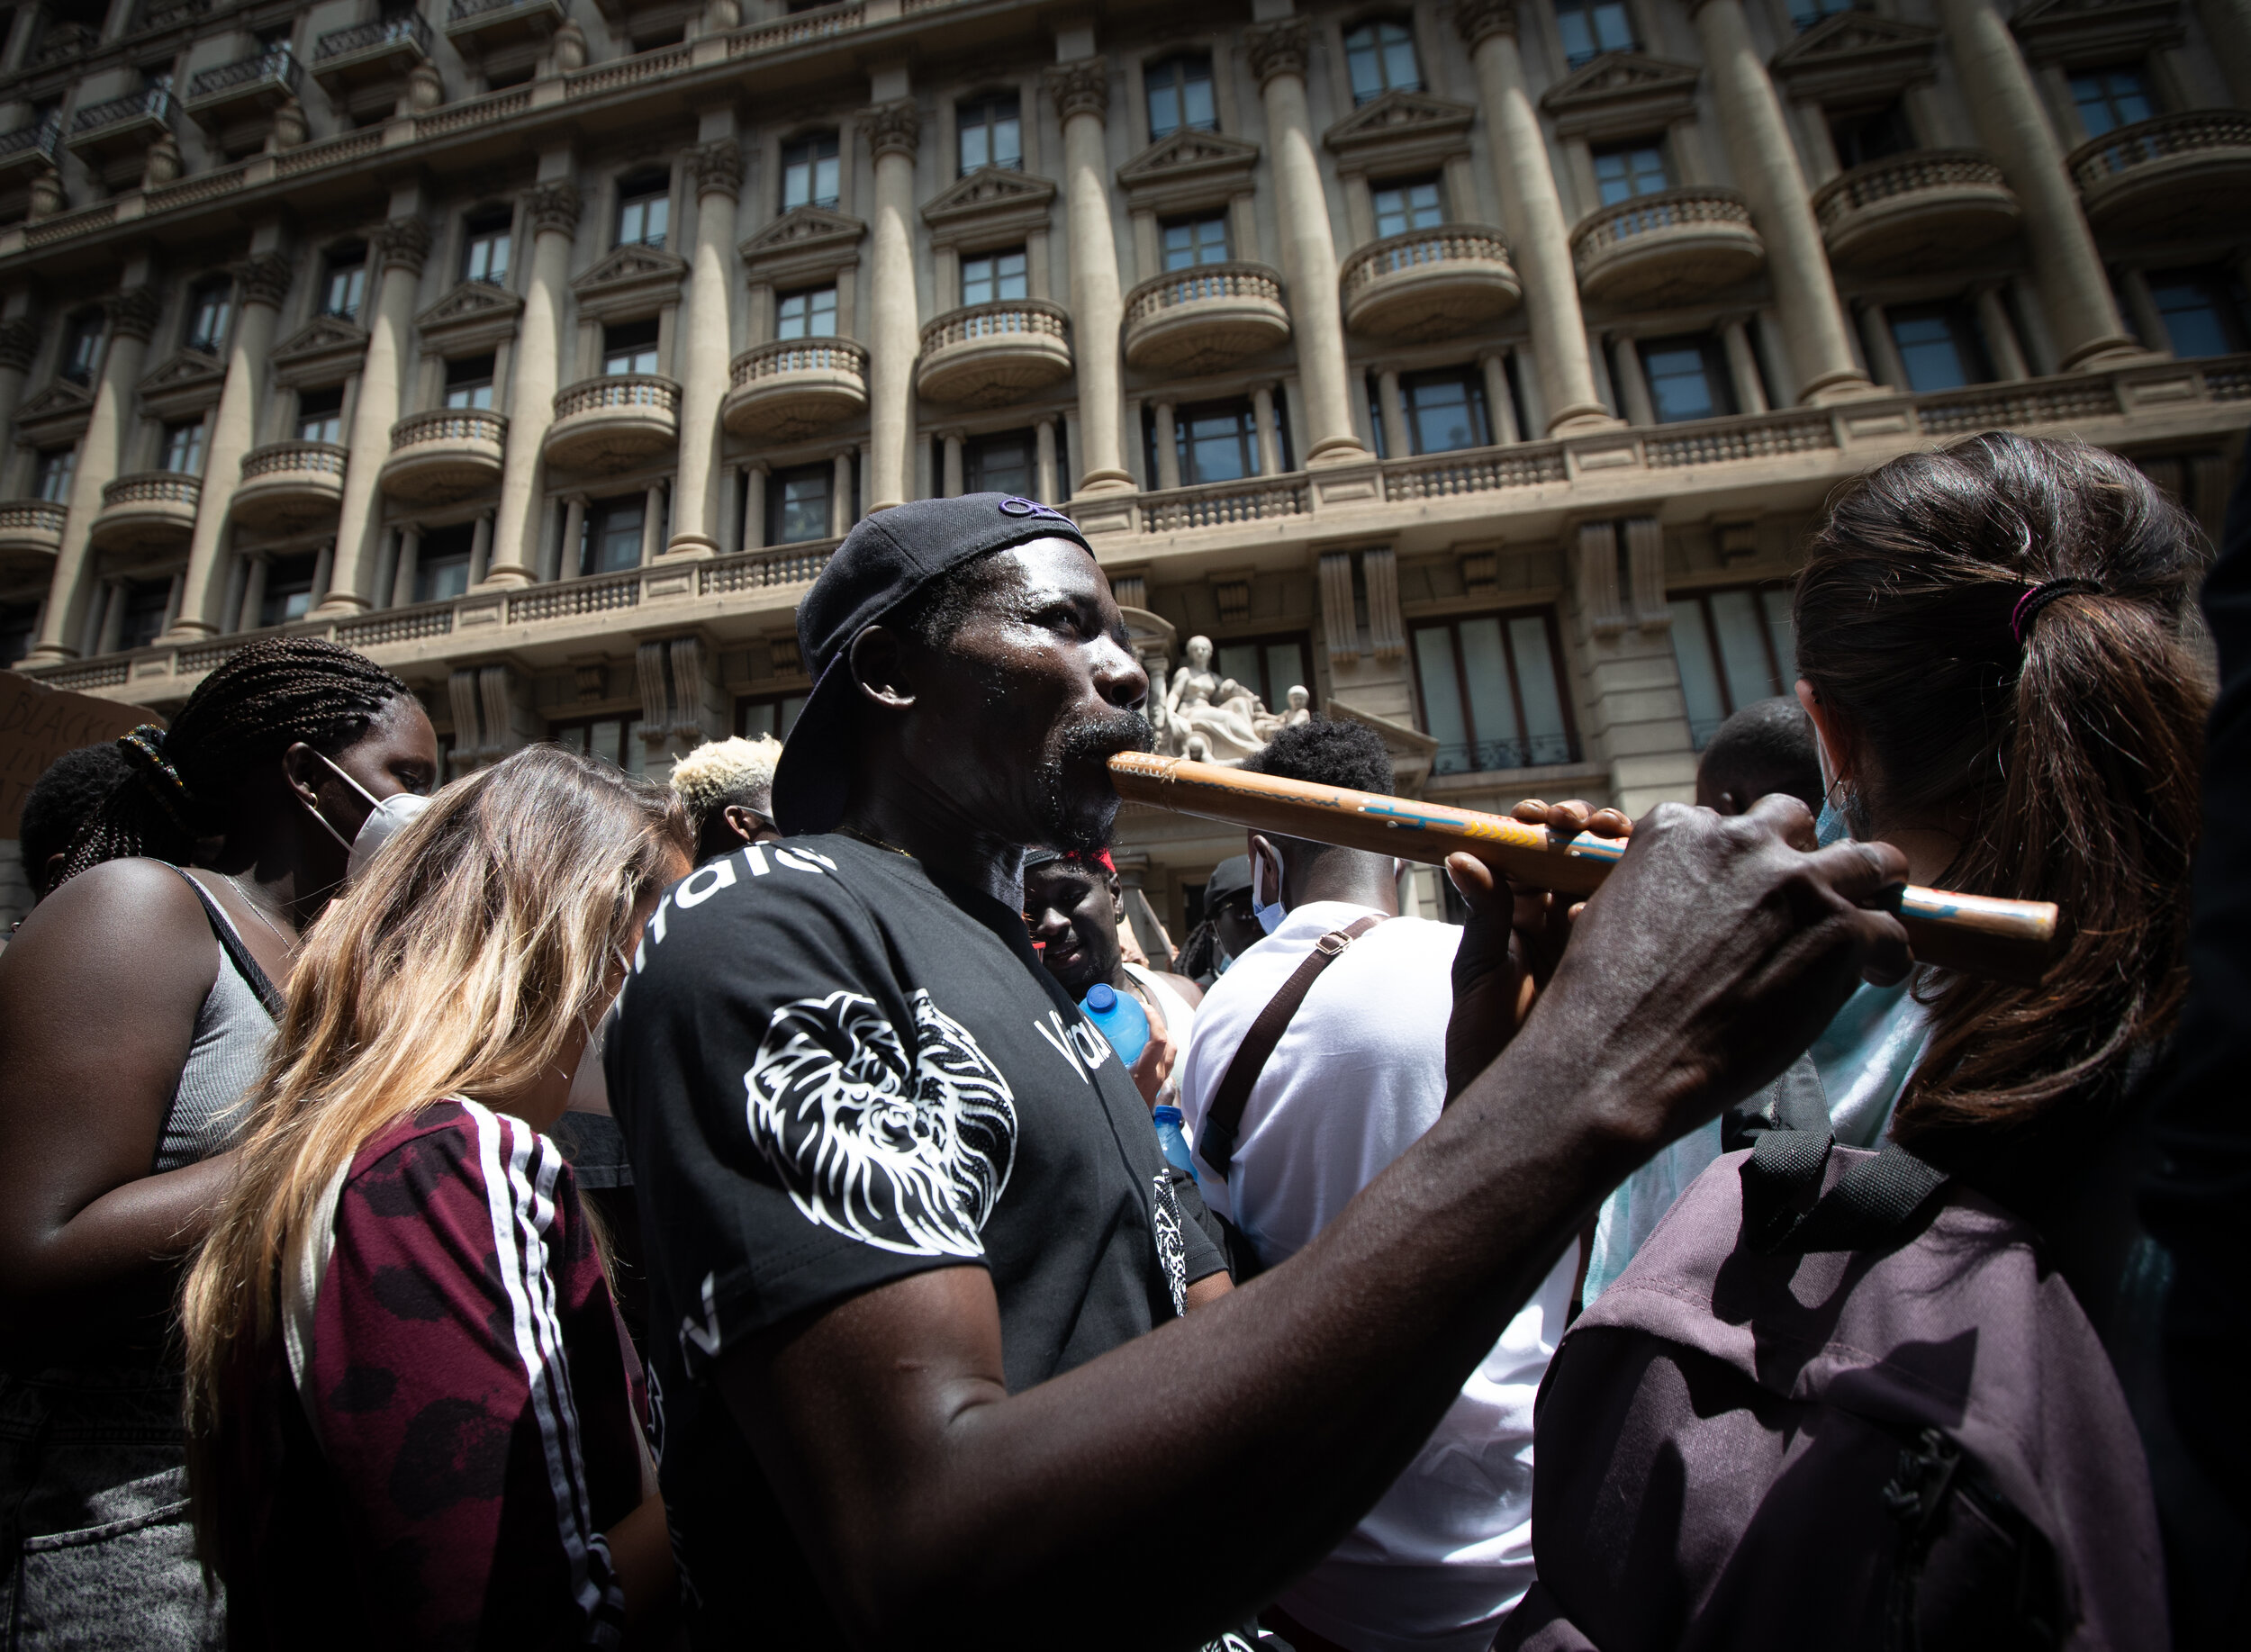  After the protest people marched the streets of center Barcelona playing music and dancing in celebration of Black lives.  June 7th, 2020 